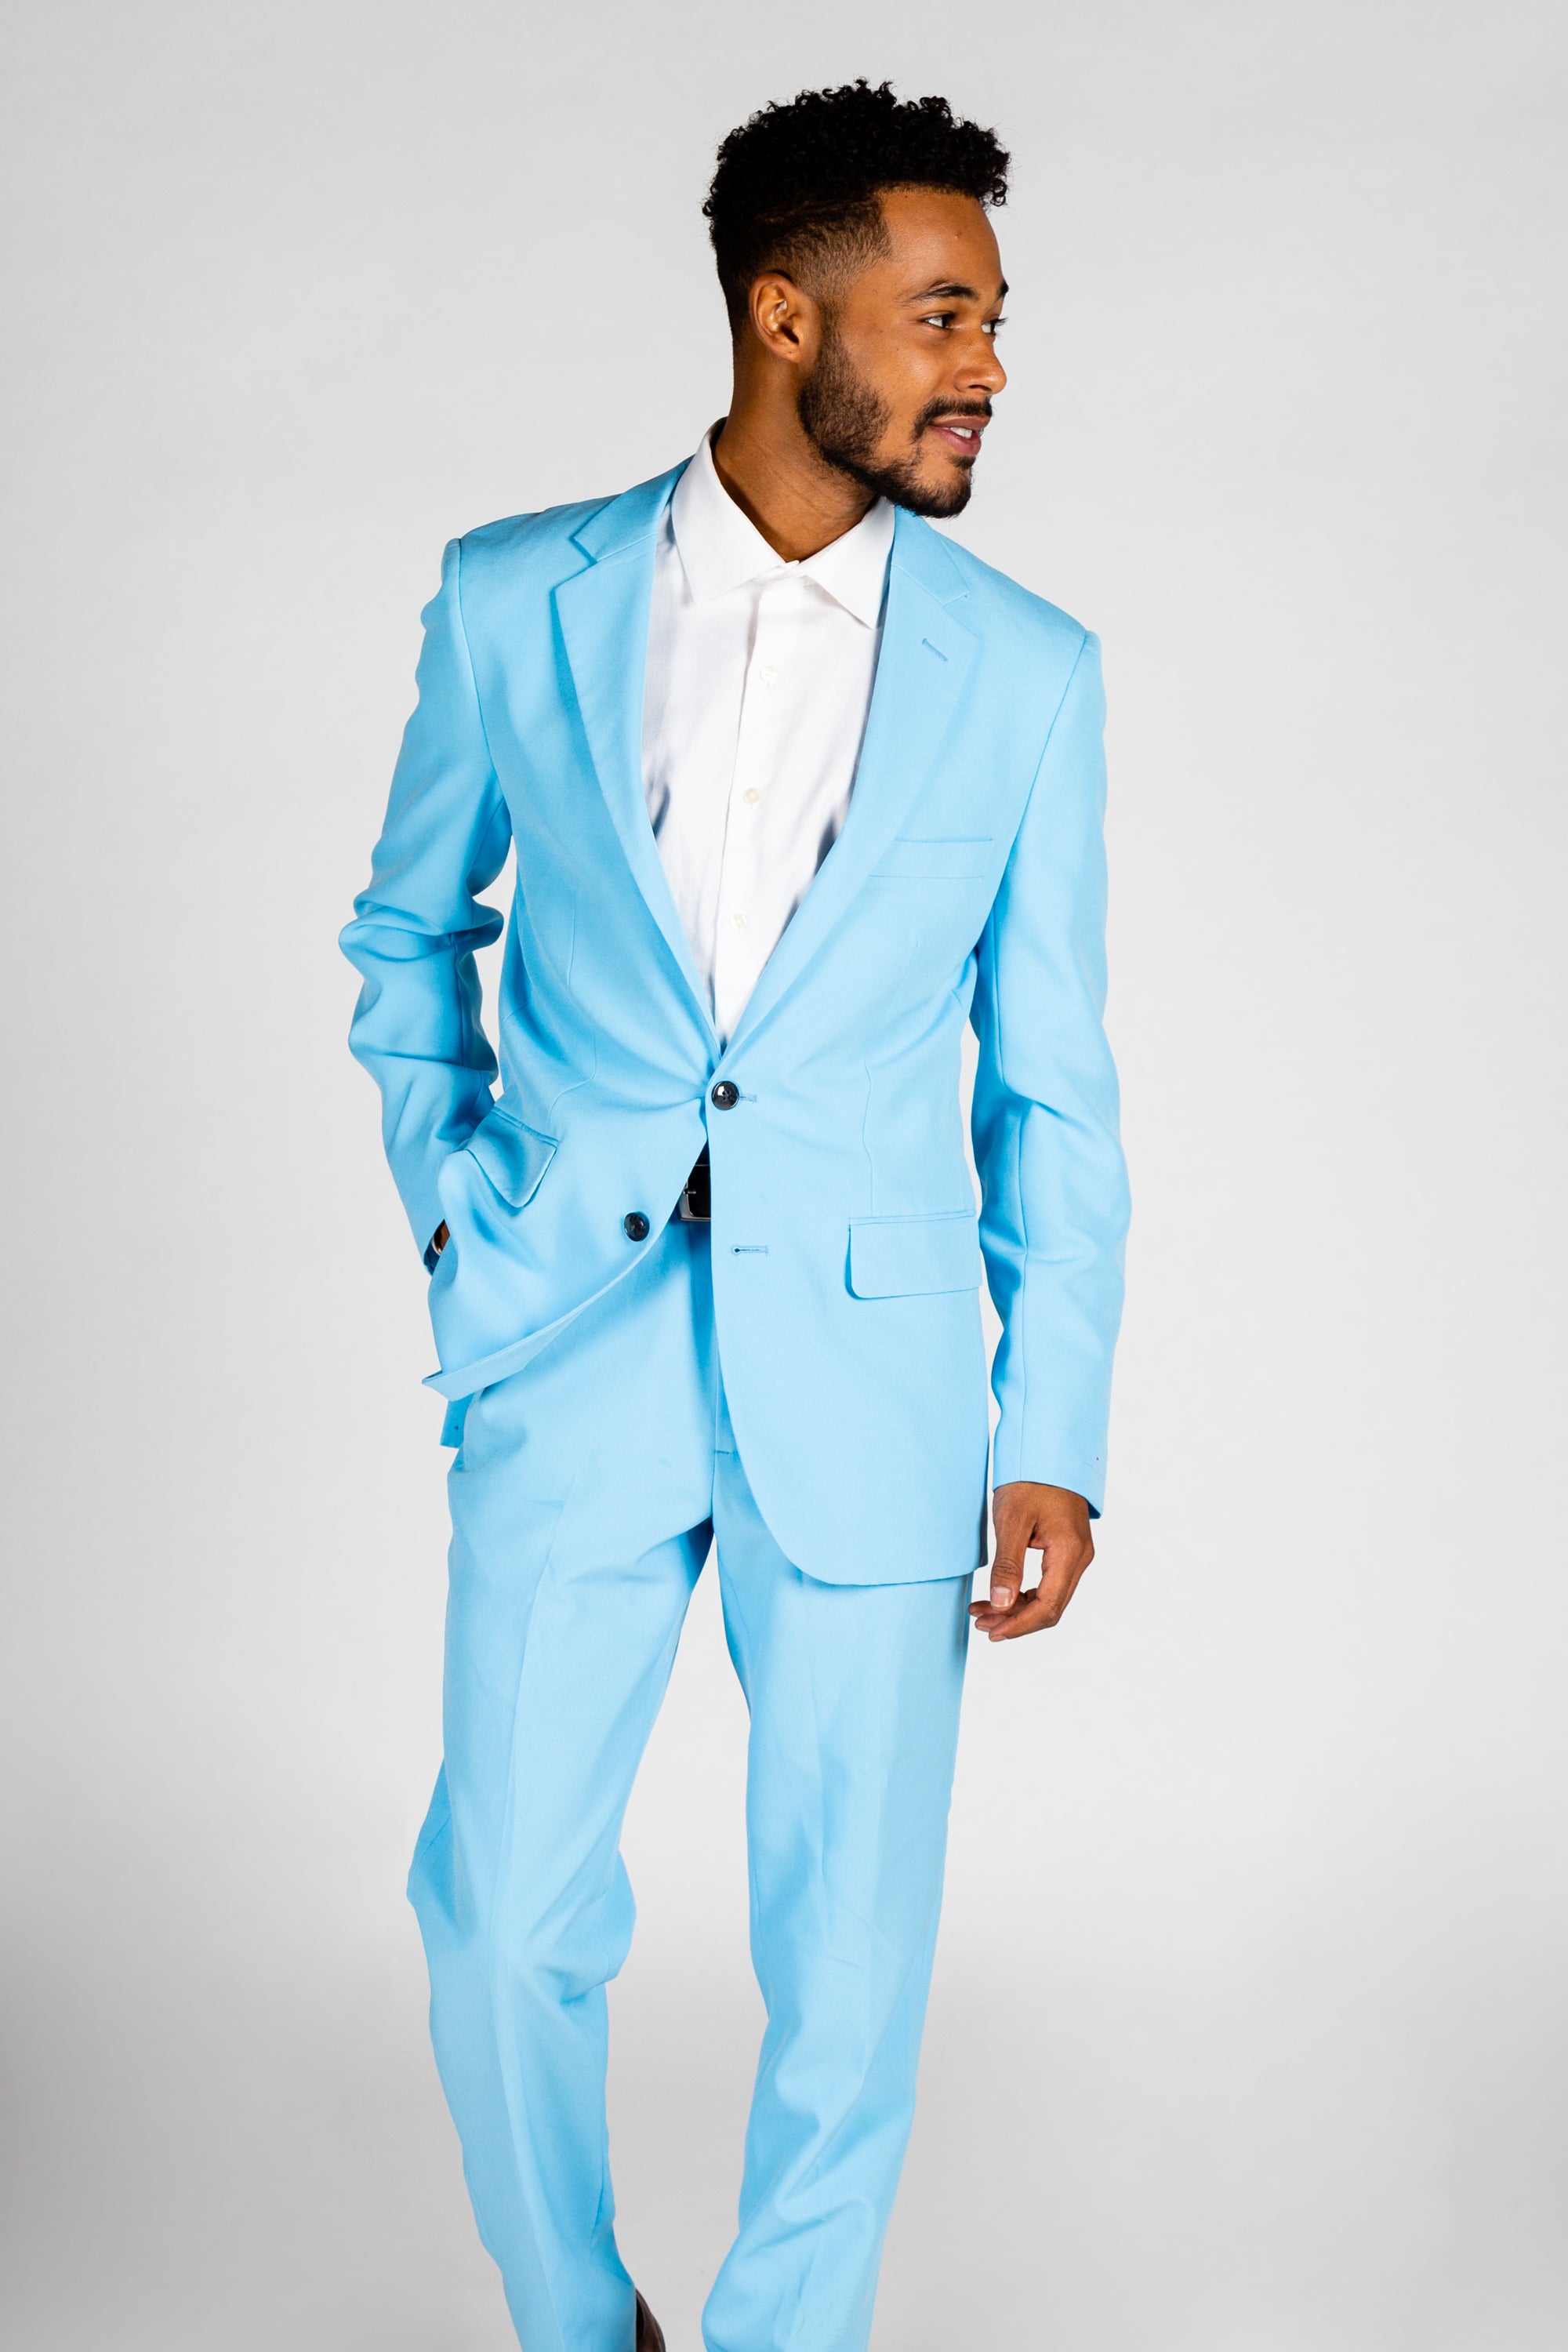 Baby Blue Suit | The Sweet Barry Blue